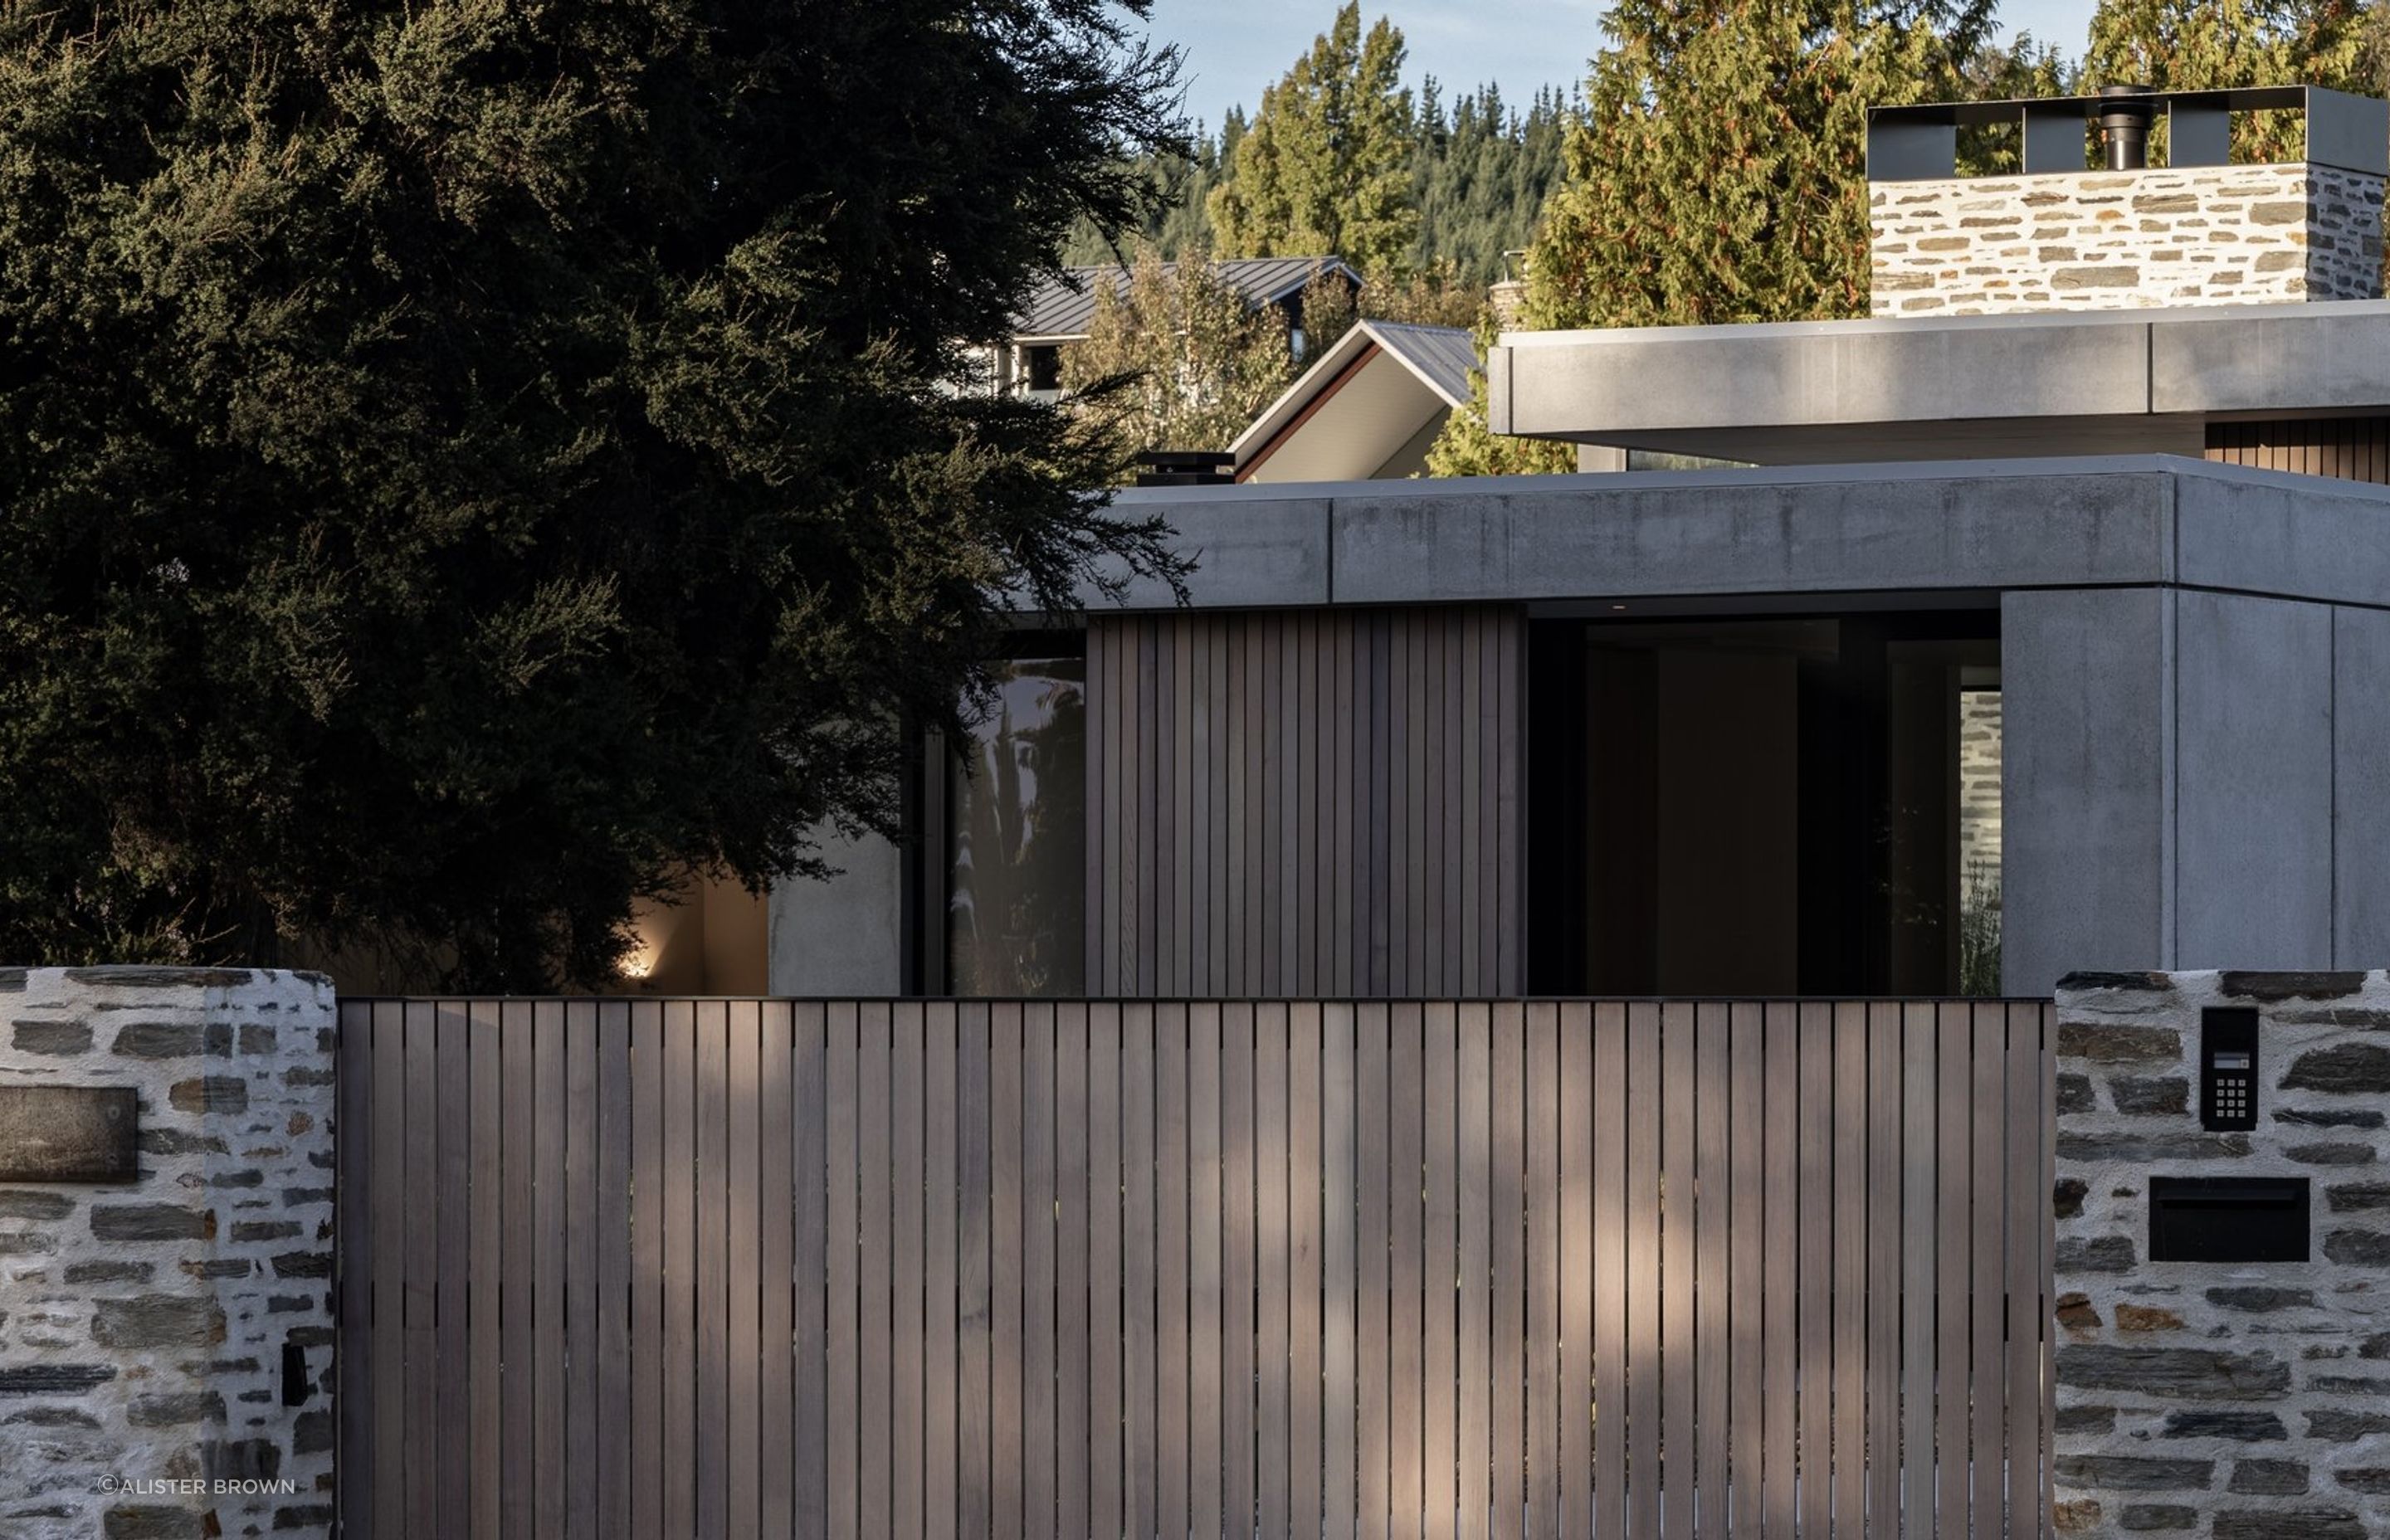 Beacon Point Road is dotted with homes, but Koroa House's protective form and material palette curate a sense of privacy.